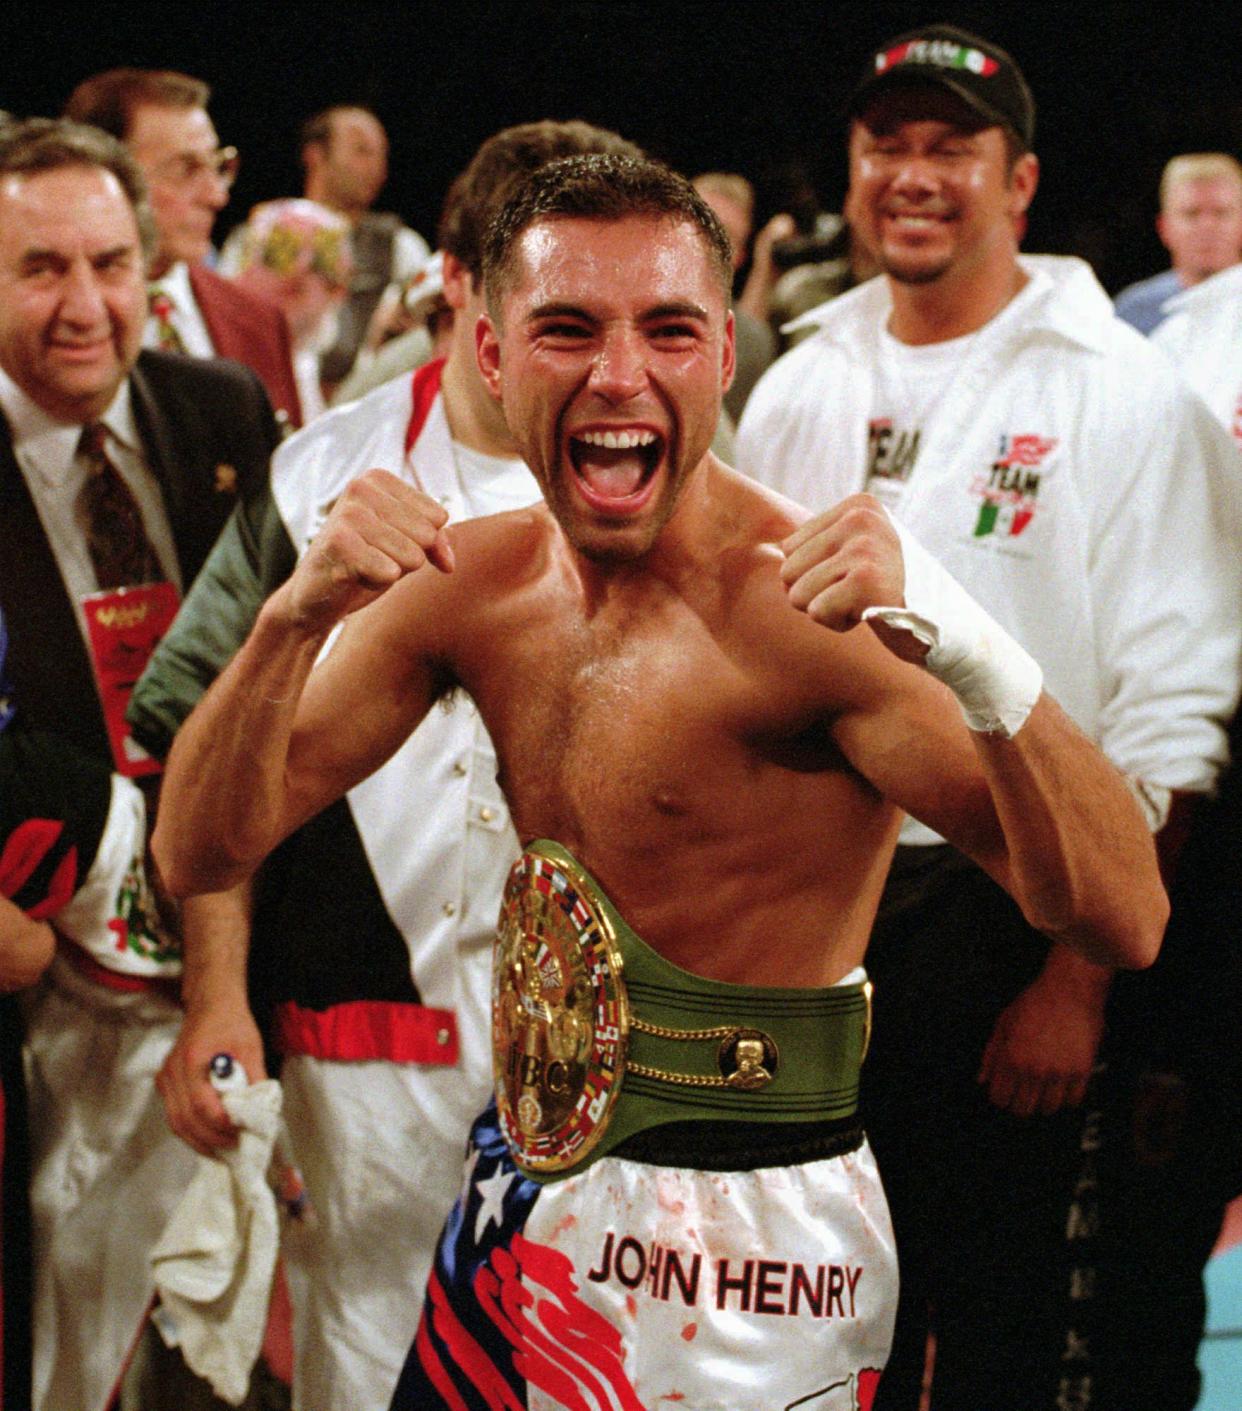 FILE - In this June 7, 1996 file photo, newly crowned WBC super lightweight champion Oscar De La Hoya poses with the belt he won from Julio Cesar Chavez by TKO in the fourth round in Las Vegas. De La Hoya, Felix Trinidad and Joe Calzaghe head the class of 2014 to be inducted into the International Boxing Hall of Fame. (AP Photo/Lennox McLendon, File)